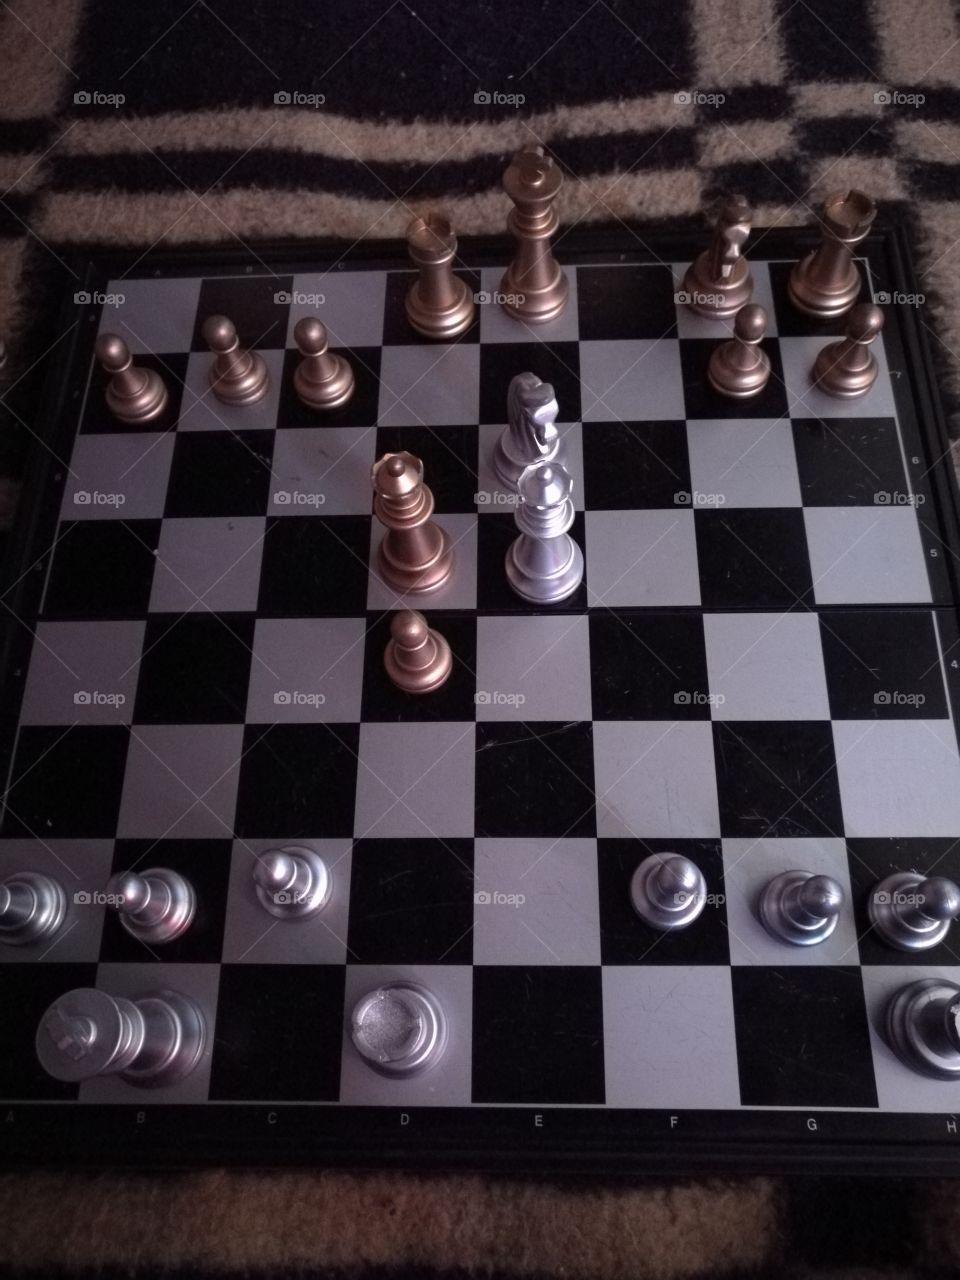 playing chess is the best way to relex!!
you should try it !!